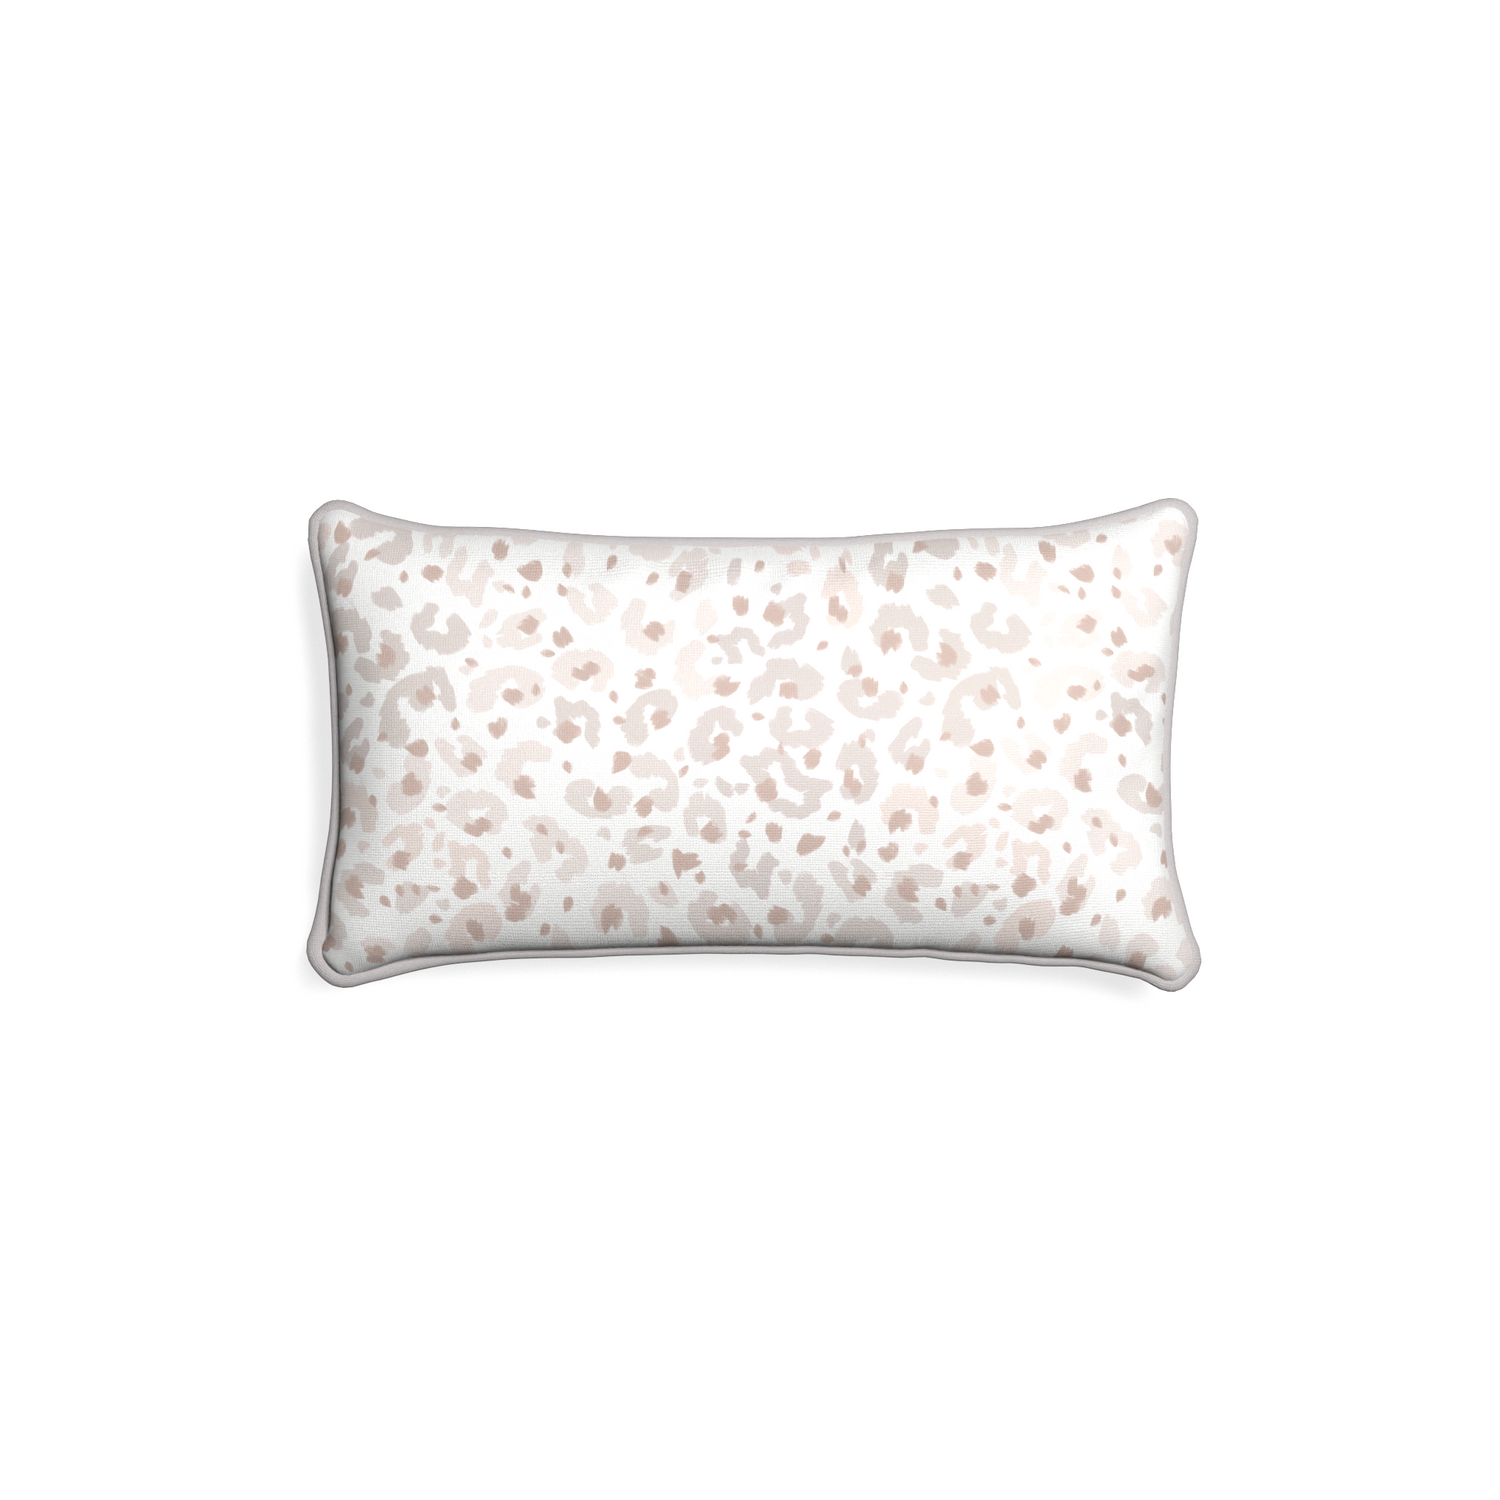 Petite-lumbar rosie custom beige animal printpillow with pebble piping on white background